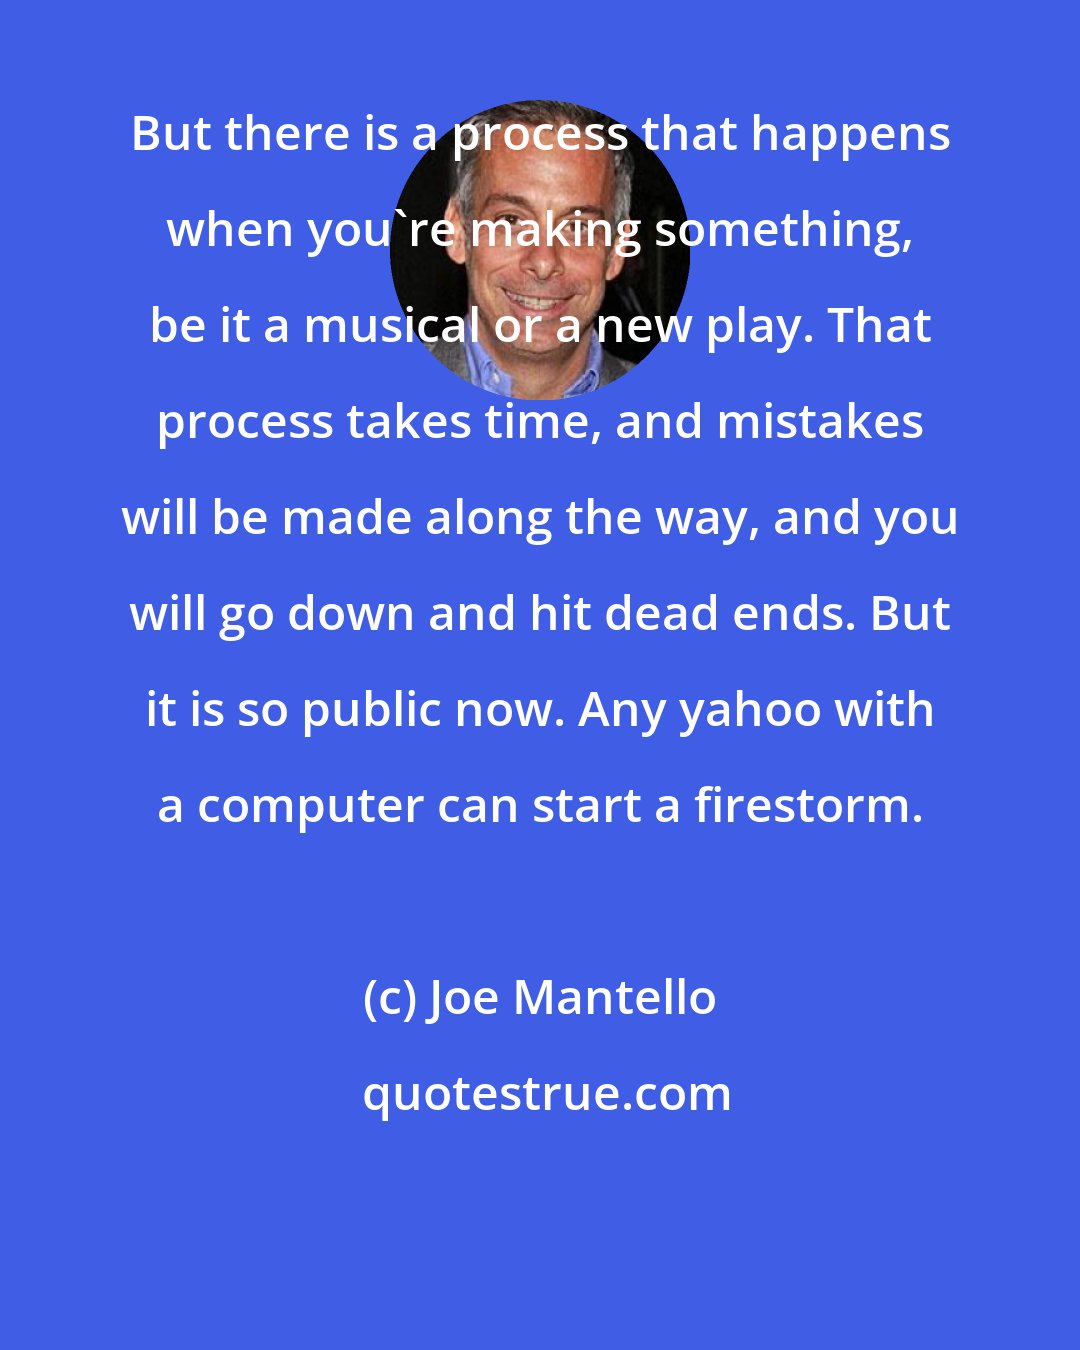 Joe Mantello: But there is a process that happens when you're making something, be it a musical or a new play. That process takes time, and mistakes will be made along the way, and you will go down and hit dead ends. But it is so public now. Any yahoo with a computer can start a firestorm.